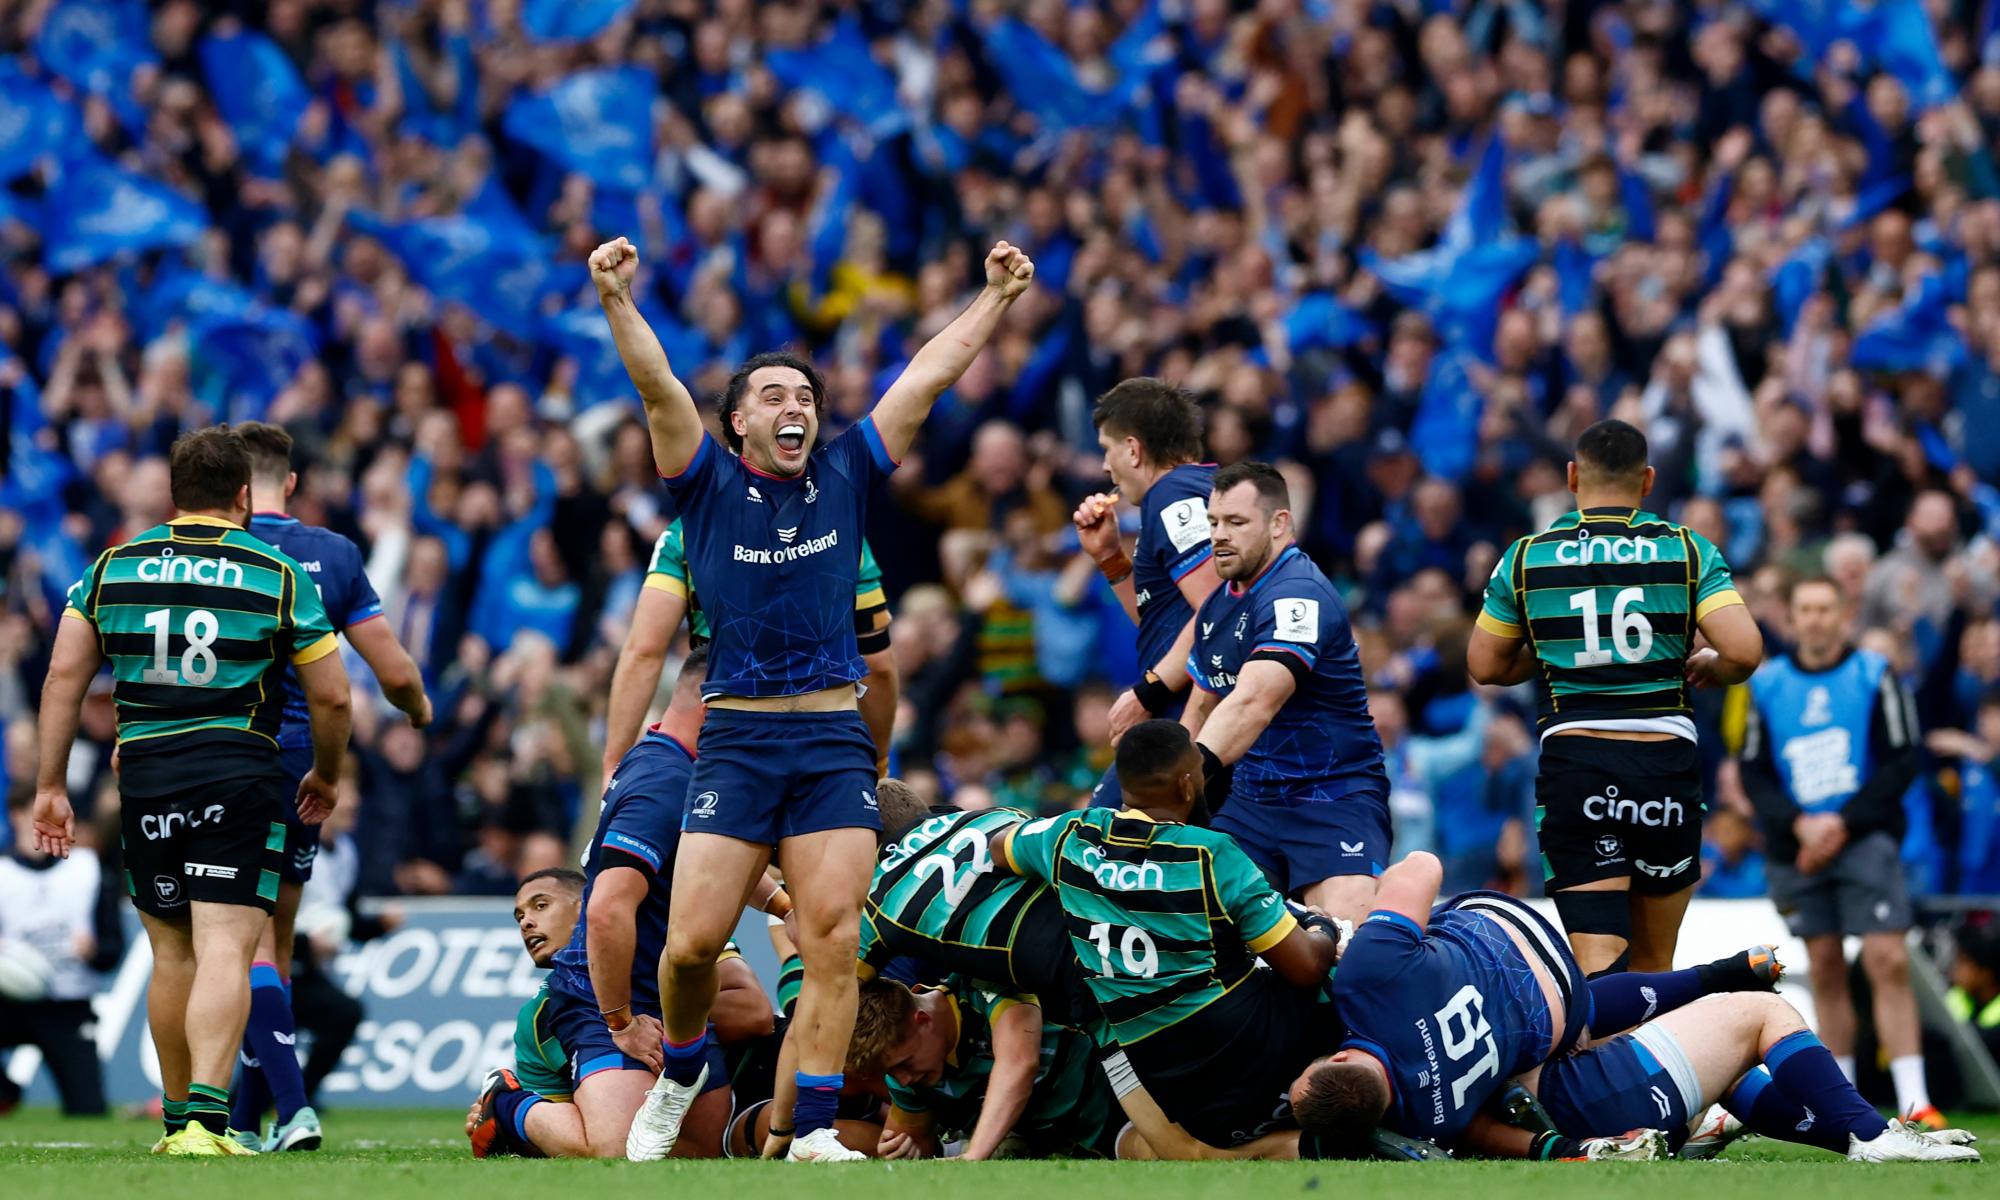 champions cup organisers considering one city semi-finals weekend in 2025